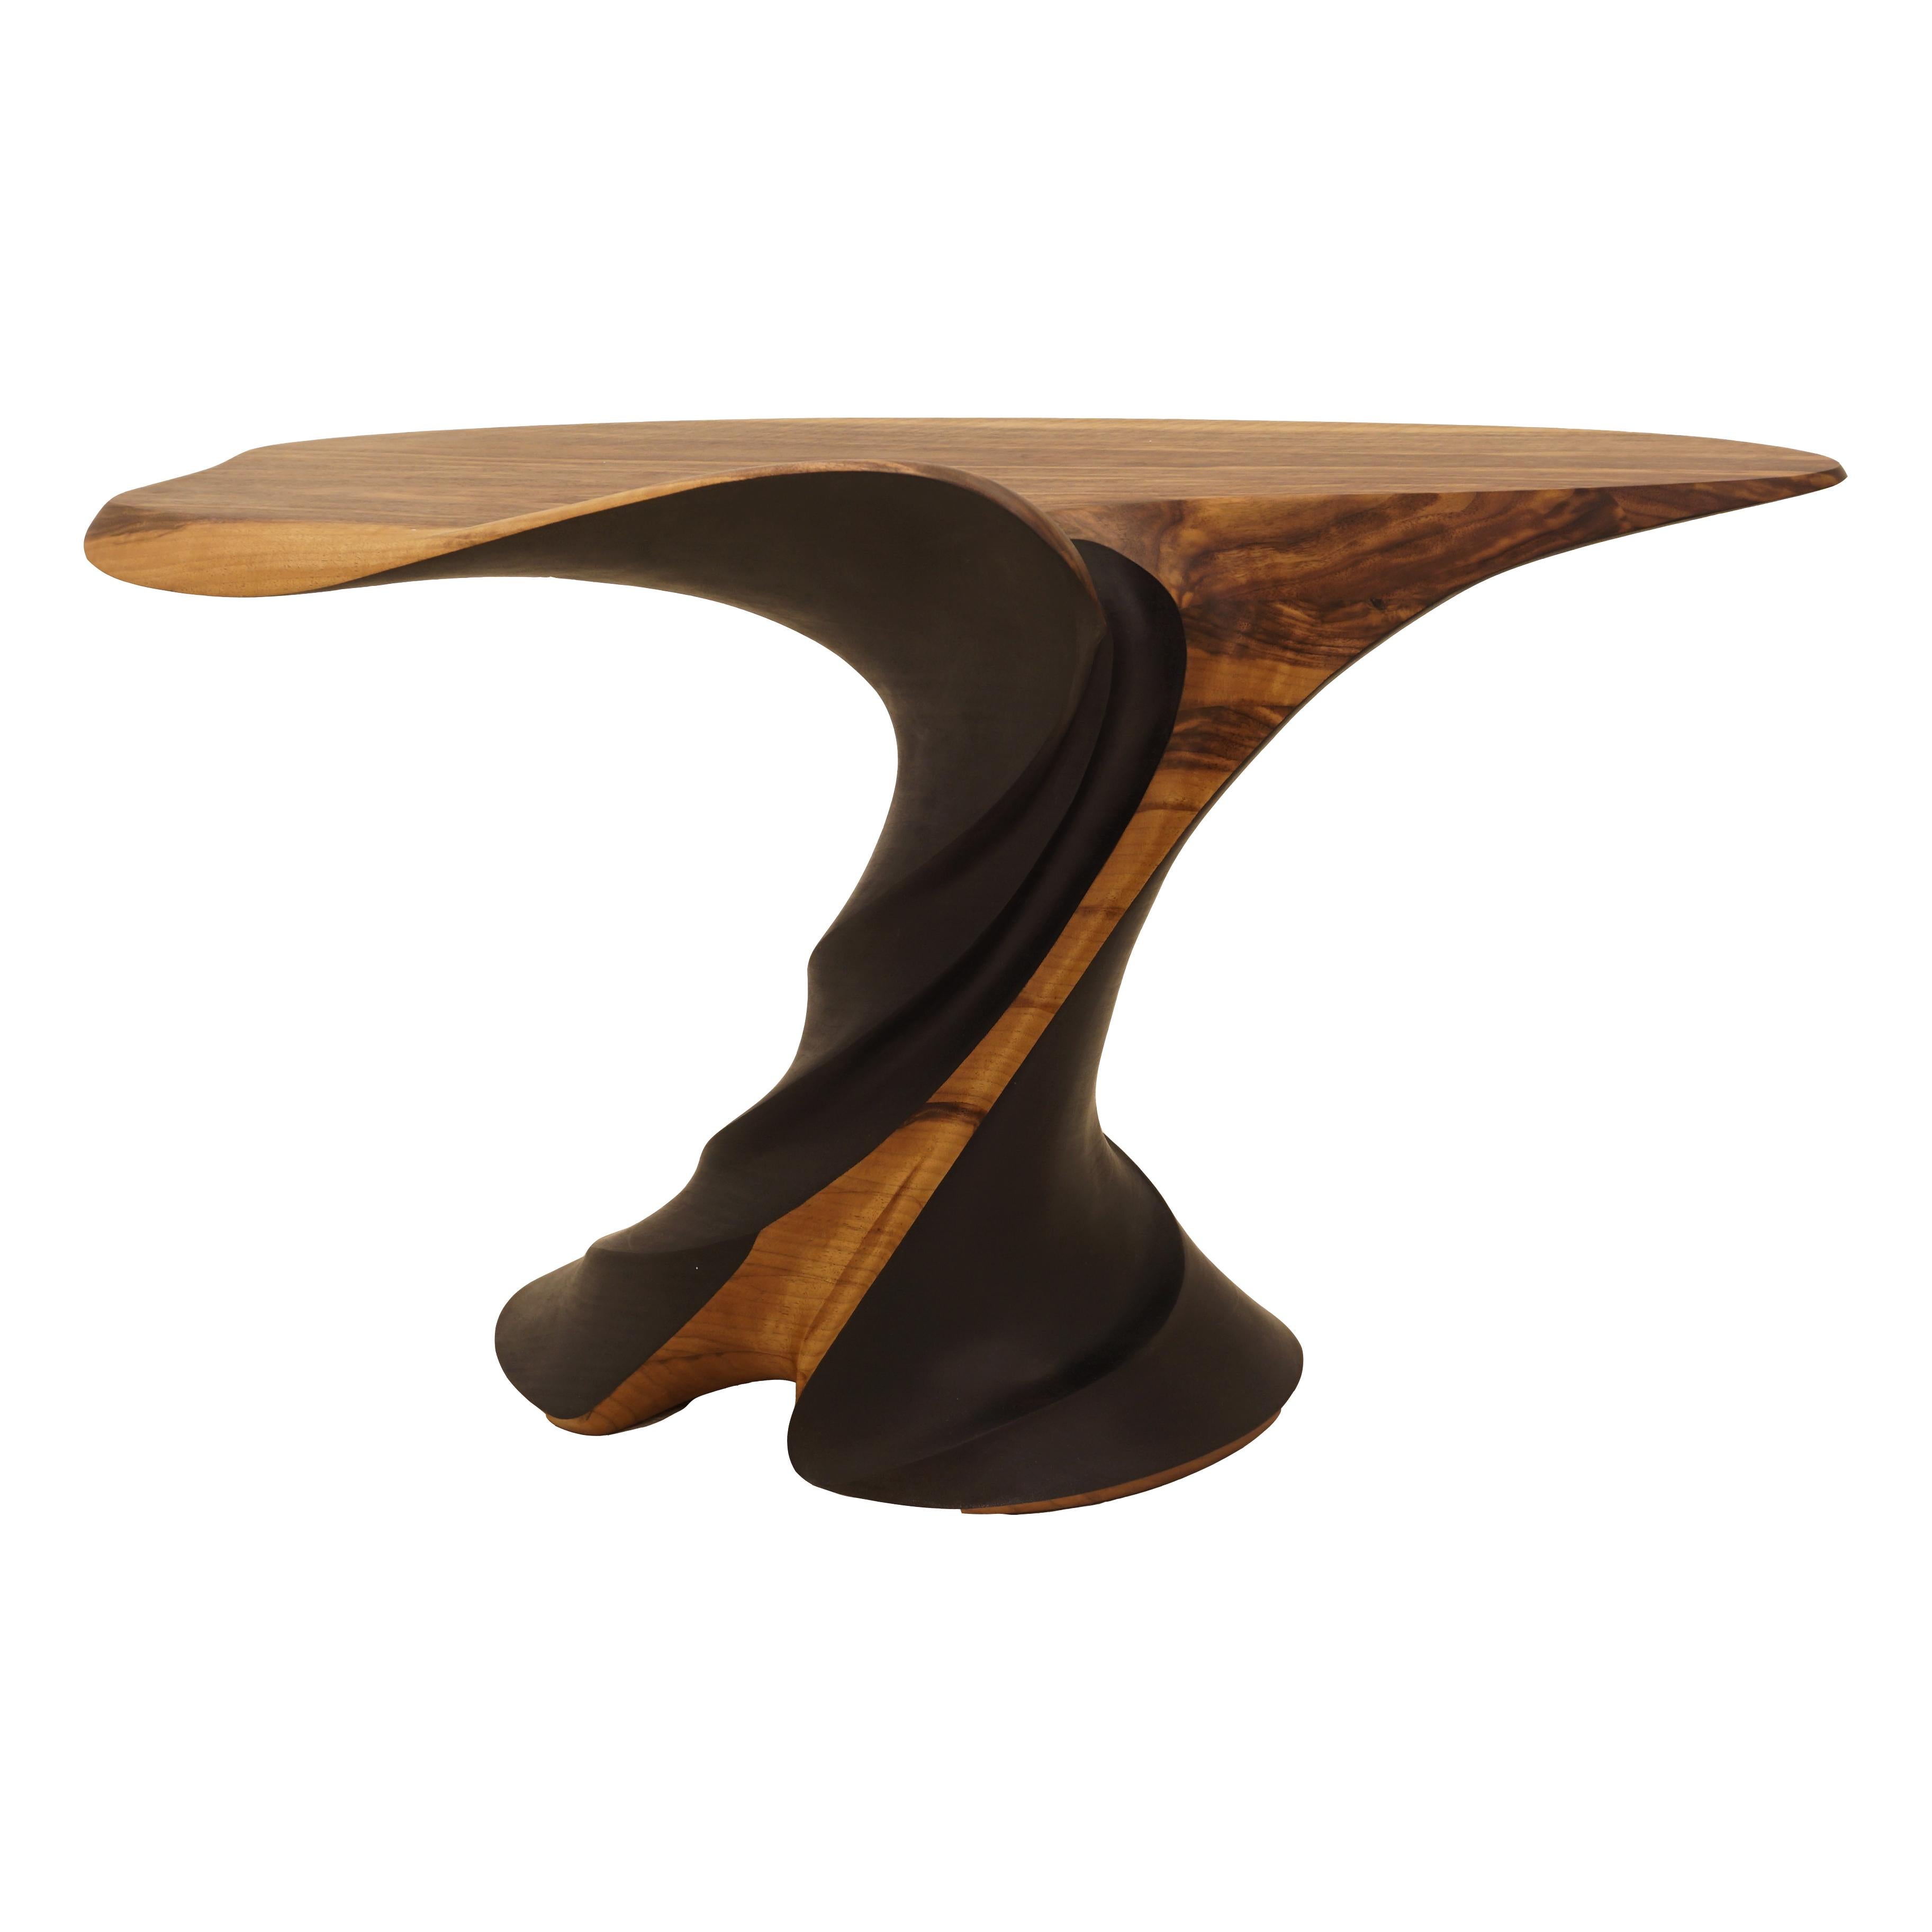 Modern Danish handcrafted sculptural walnut coffee table by Morten Stenbæk
Signed and dated.